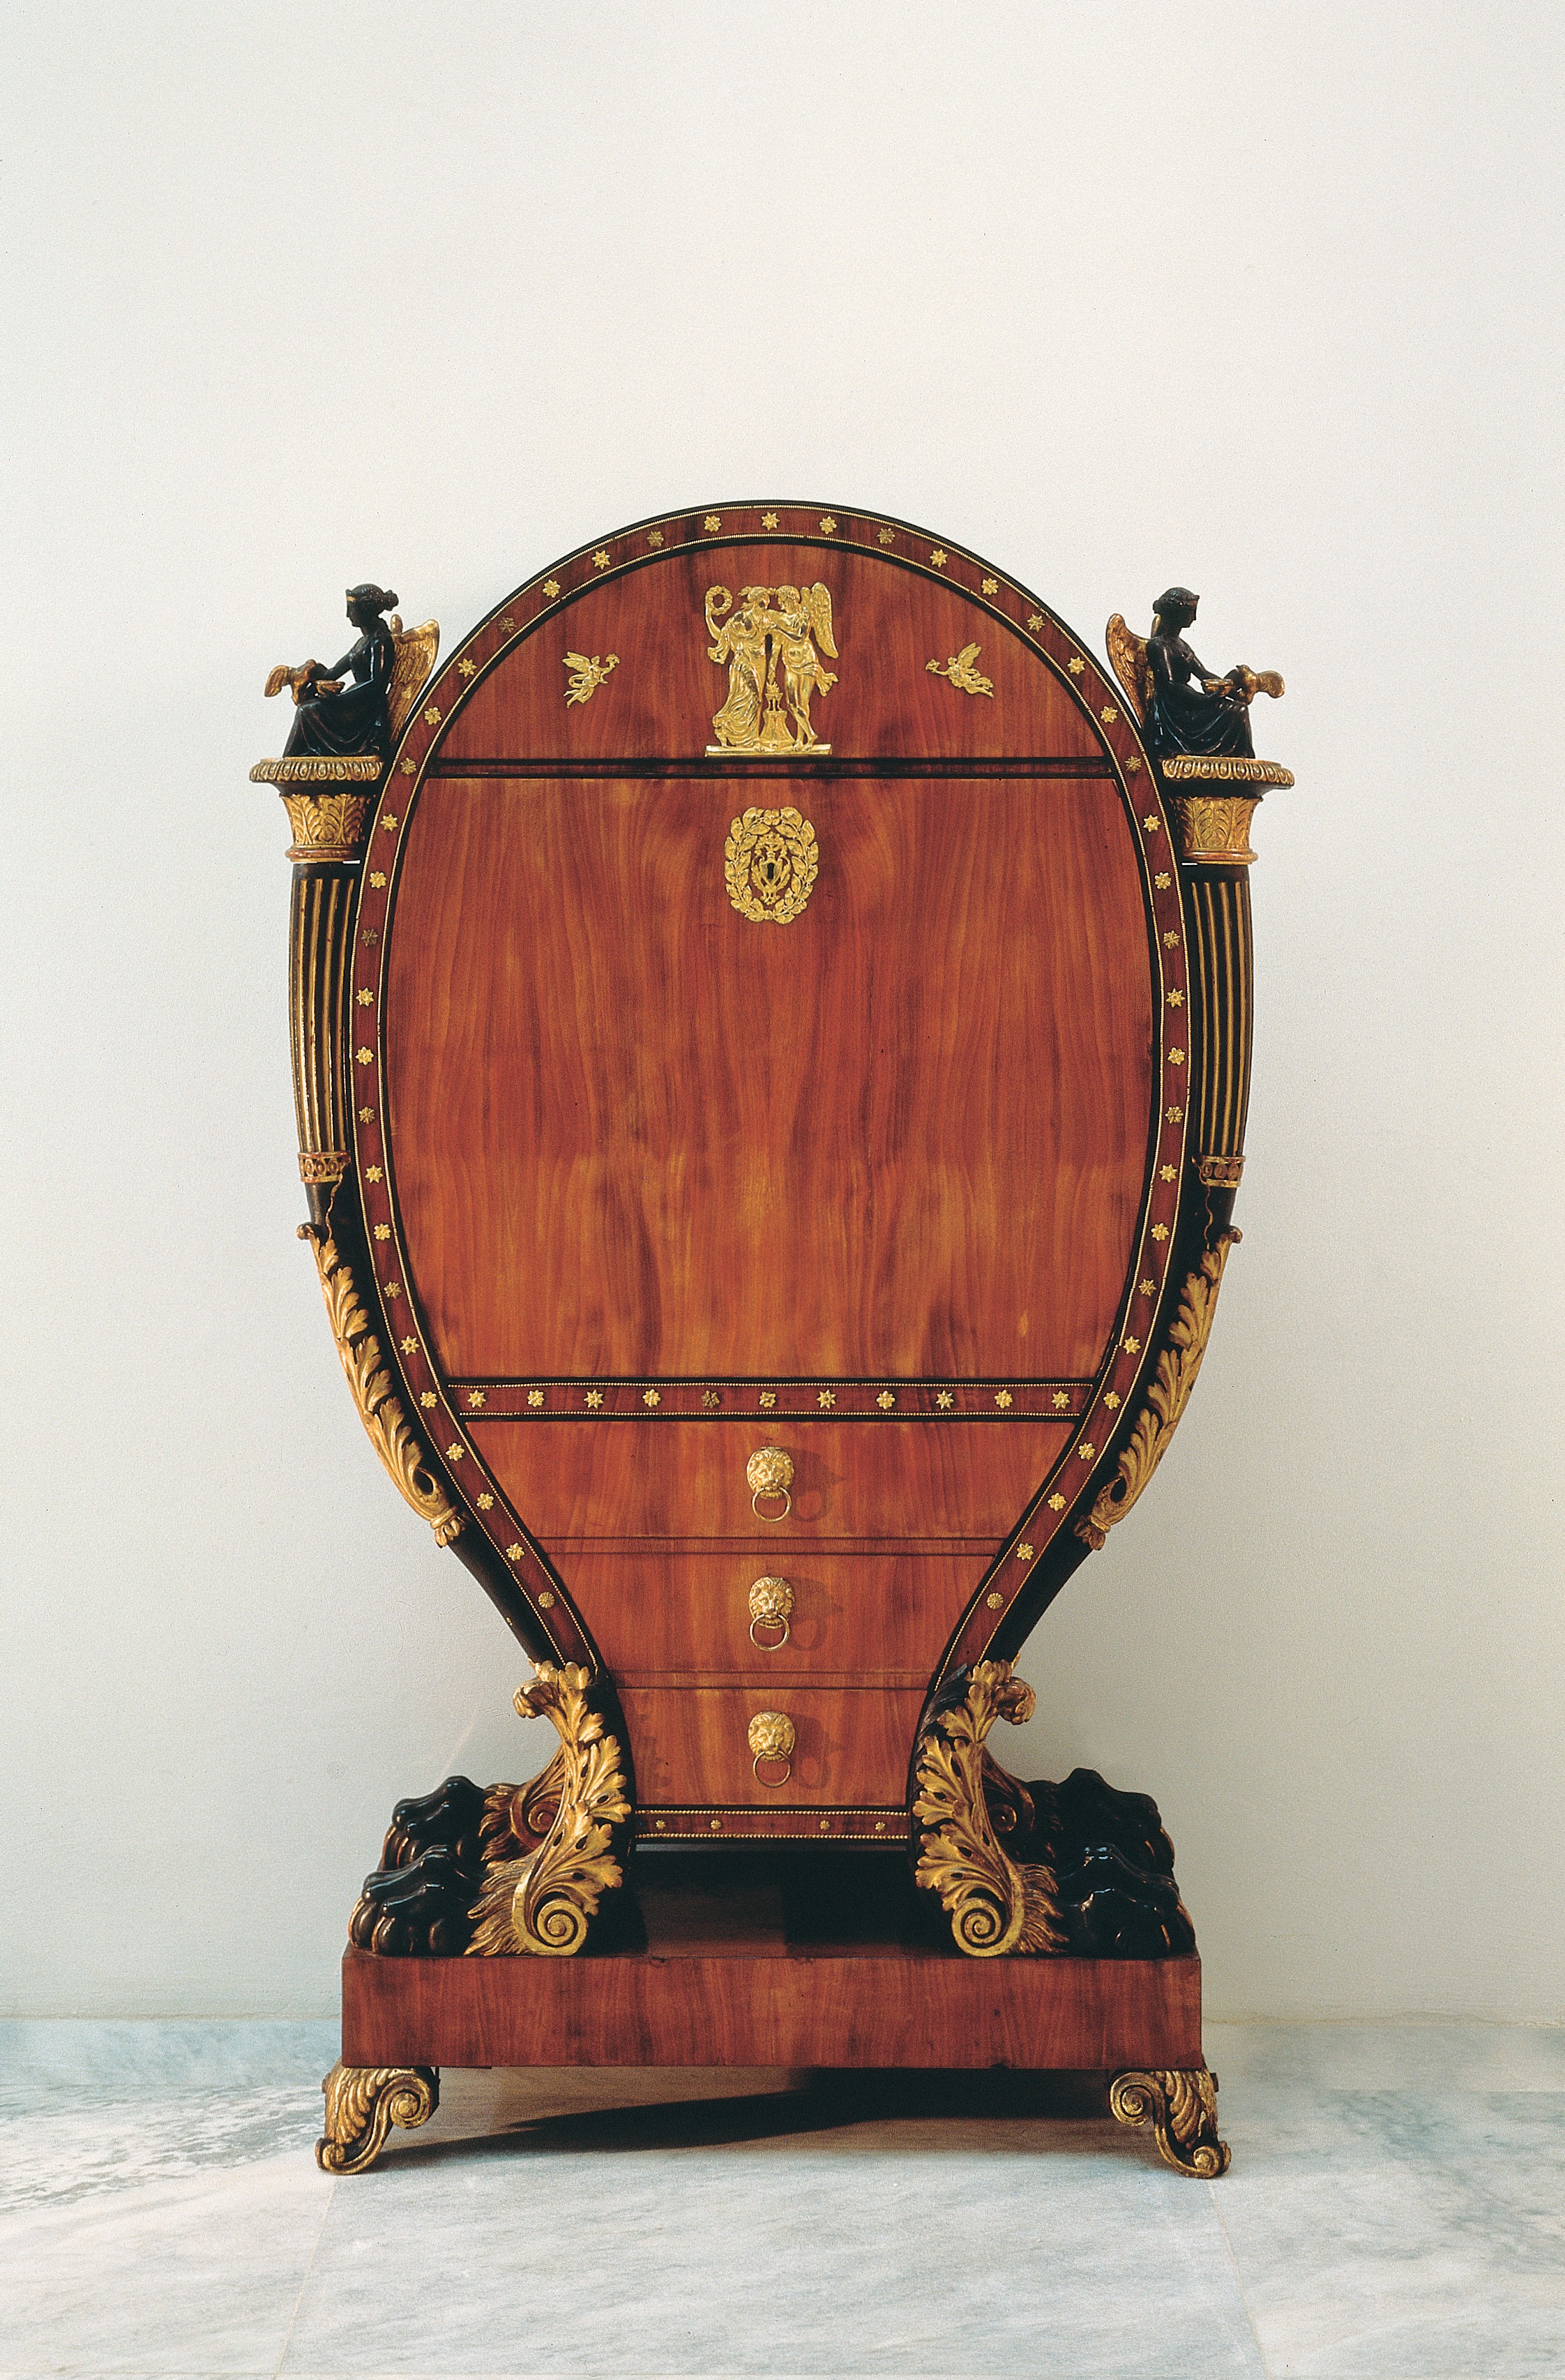 <BODY><div>BUREAU CABINET</div><div>Vienna, ca. 1815</div><div>Mahogany, black-stained wood, carved limewood, partly painted black and with verde-antique finish, partly gilded and bronzed; gilt brass and bronze fittings, partly solid and pressed; inside maple and red-stained grained wood</div><div>H 2027 / 1955</div></BODY>